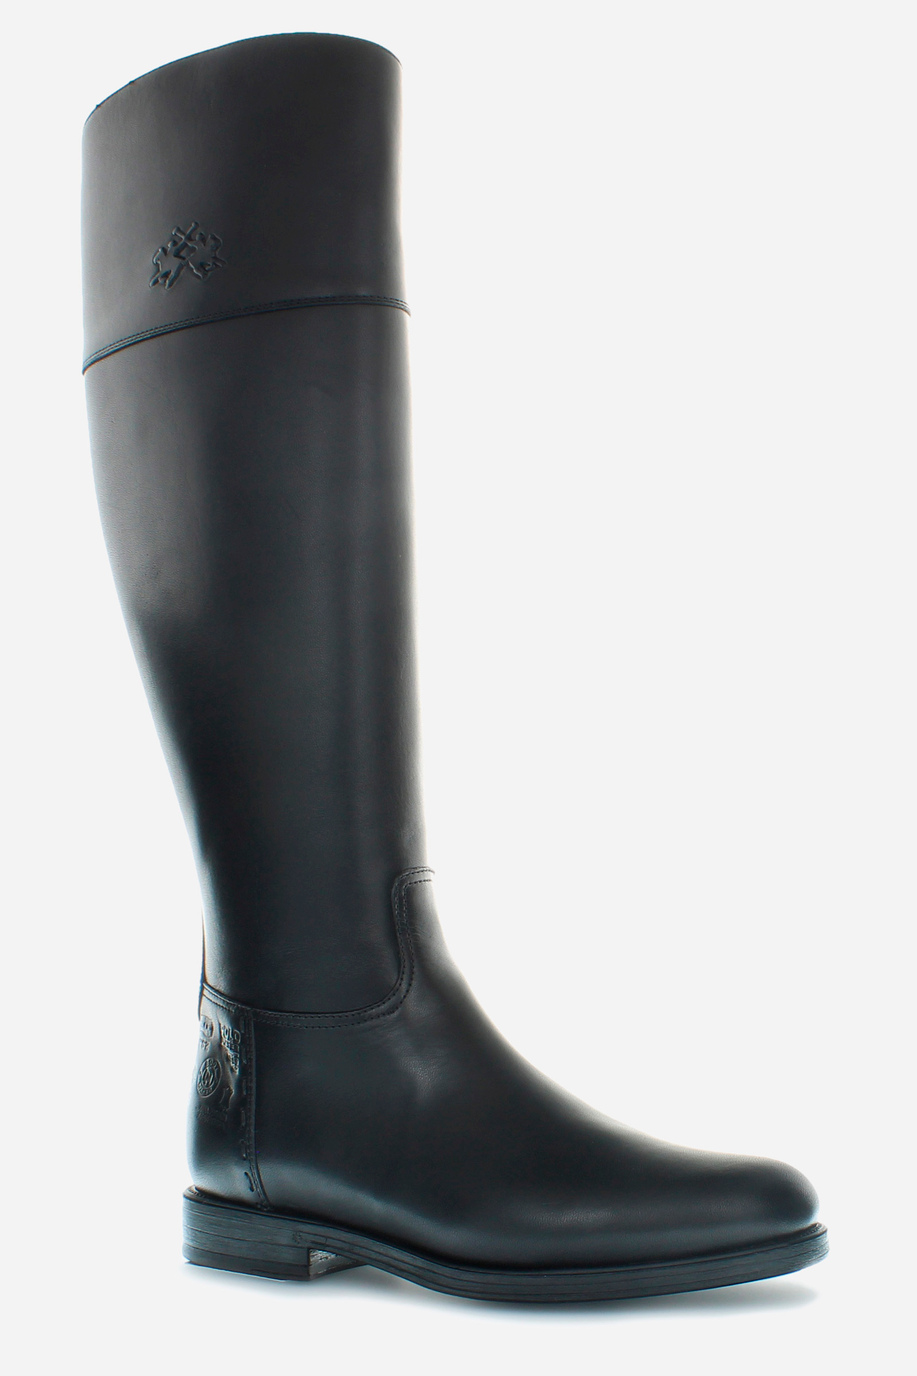 Women’s equestrian style leather boot - Accessories for her | La Martina - Official Online Shop